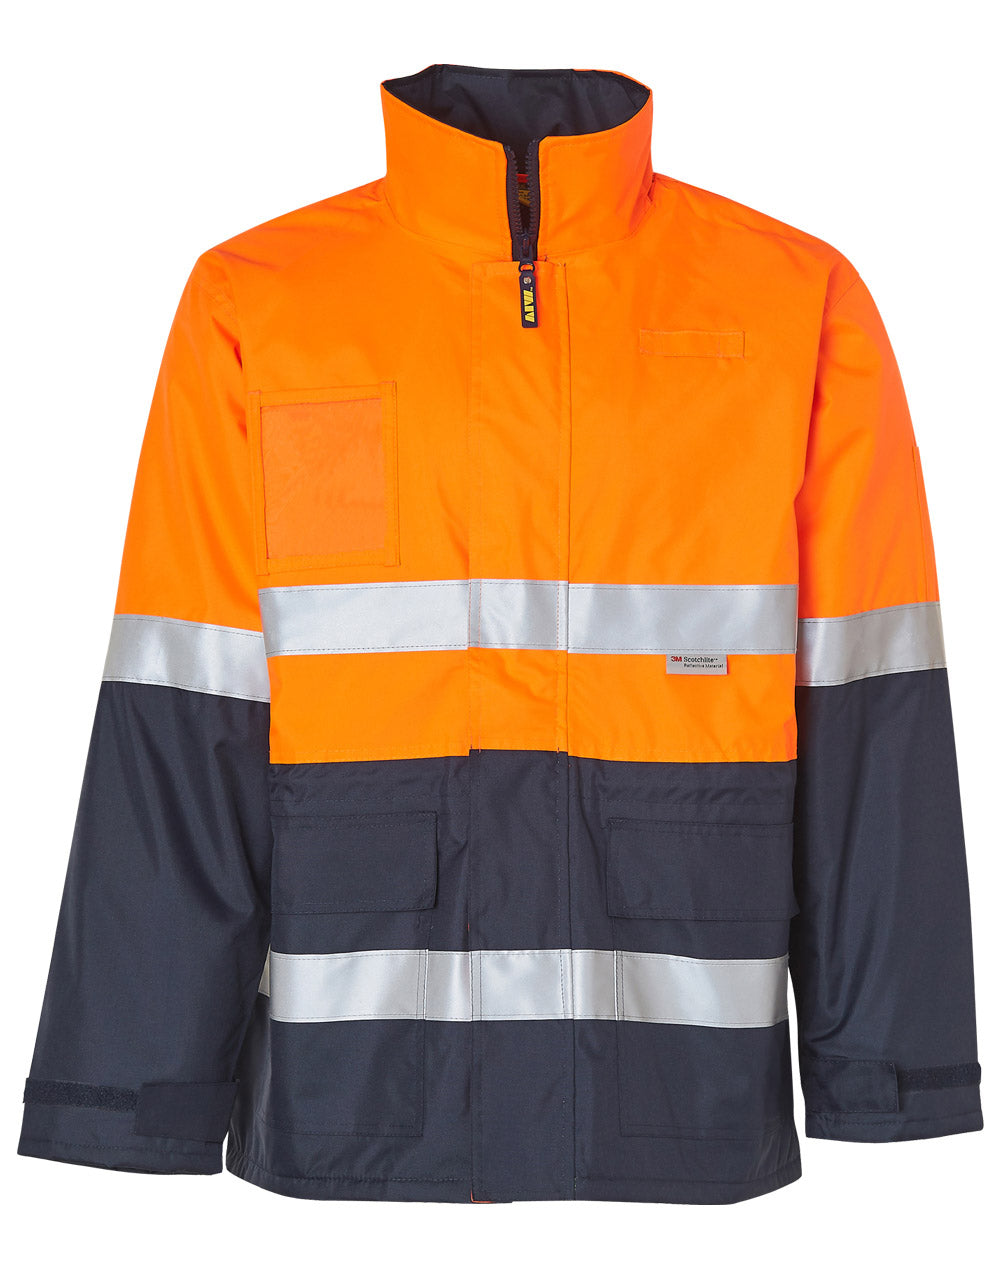 Hivis Day Night Fleece Lined Jacket - made by AIW